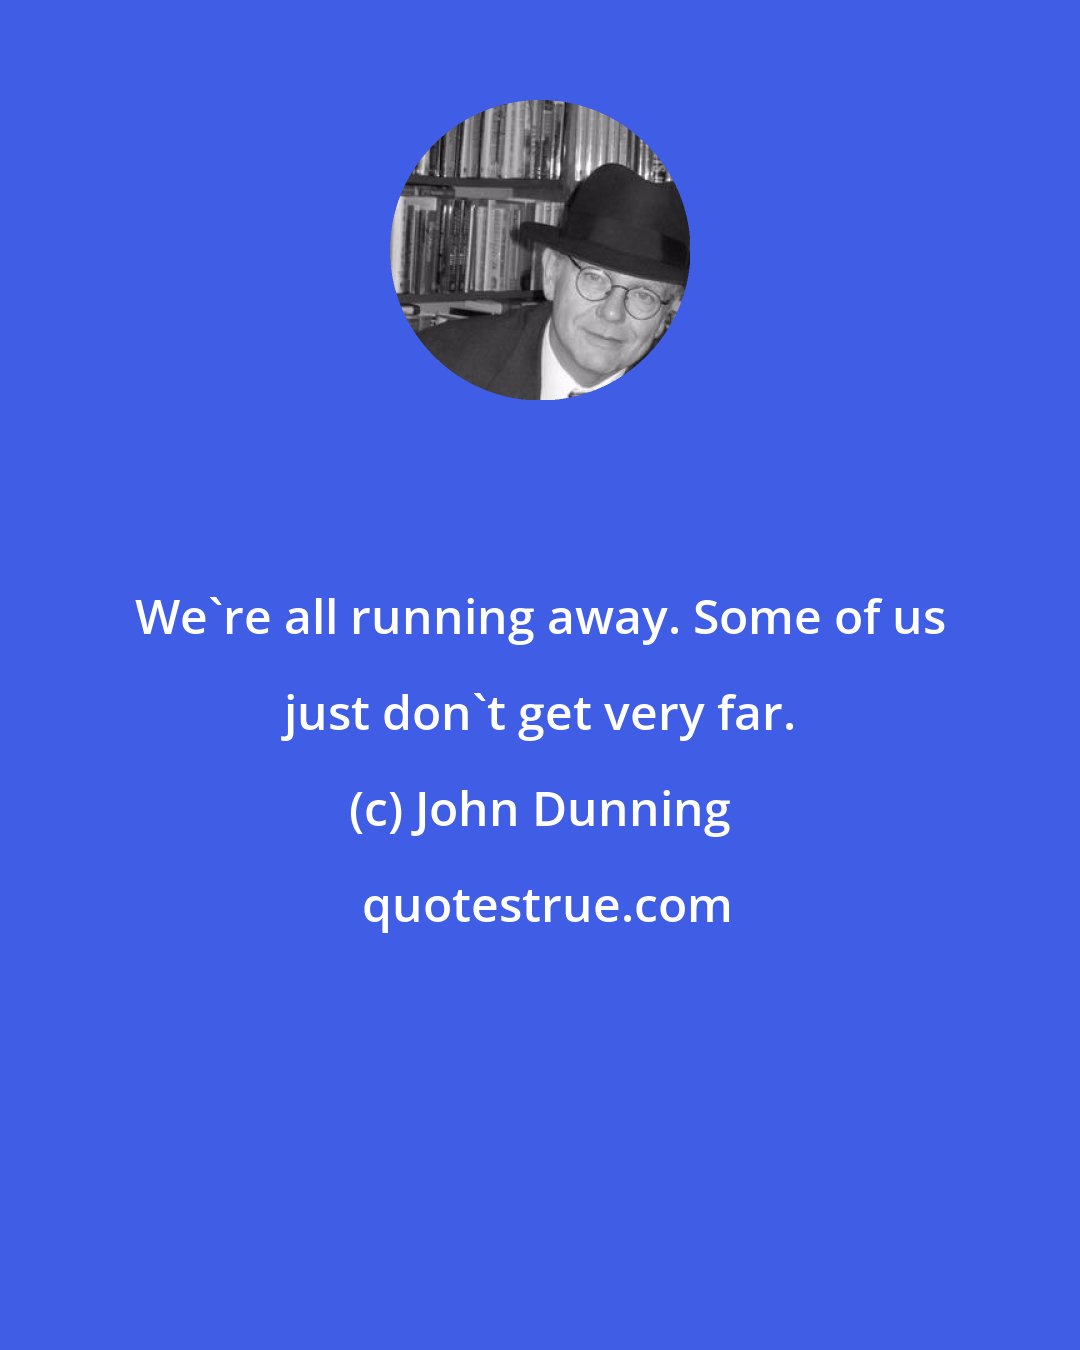 John Dunning: We're all running away. Some of us just don't get very far.